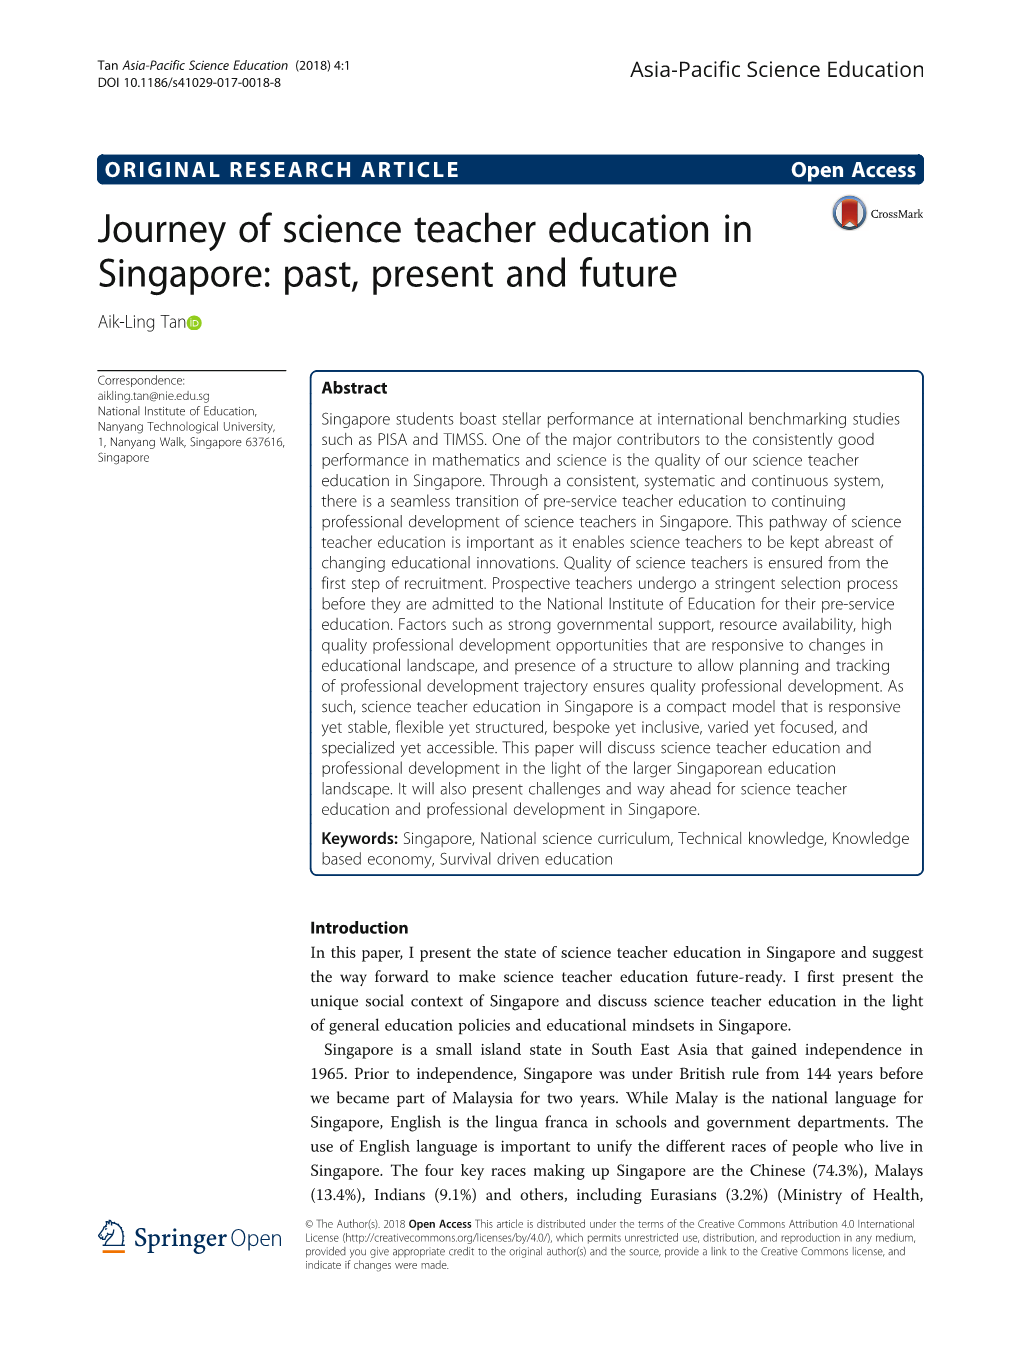 Journey of Science Teacher Education in Singapore: Past, Present and Future Aik-Ling Tan